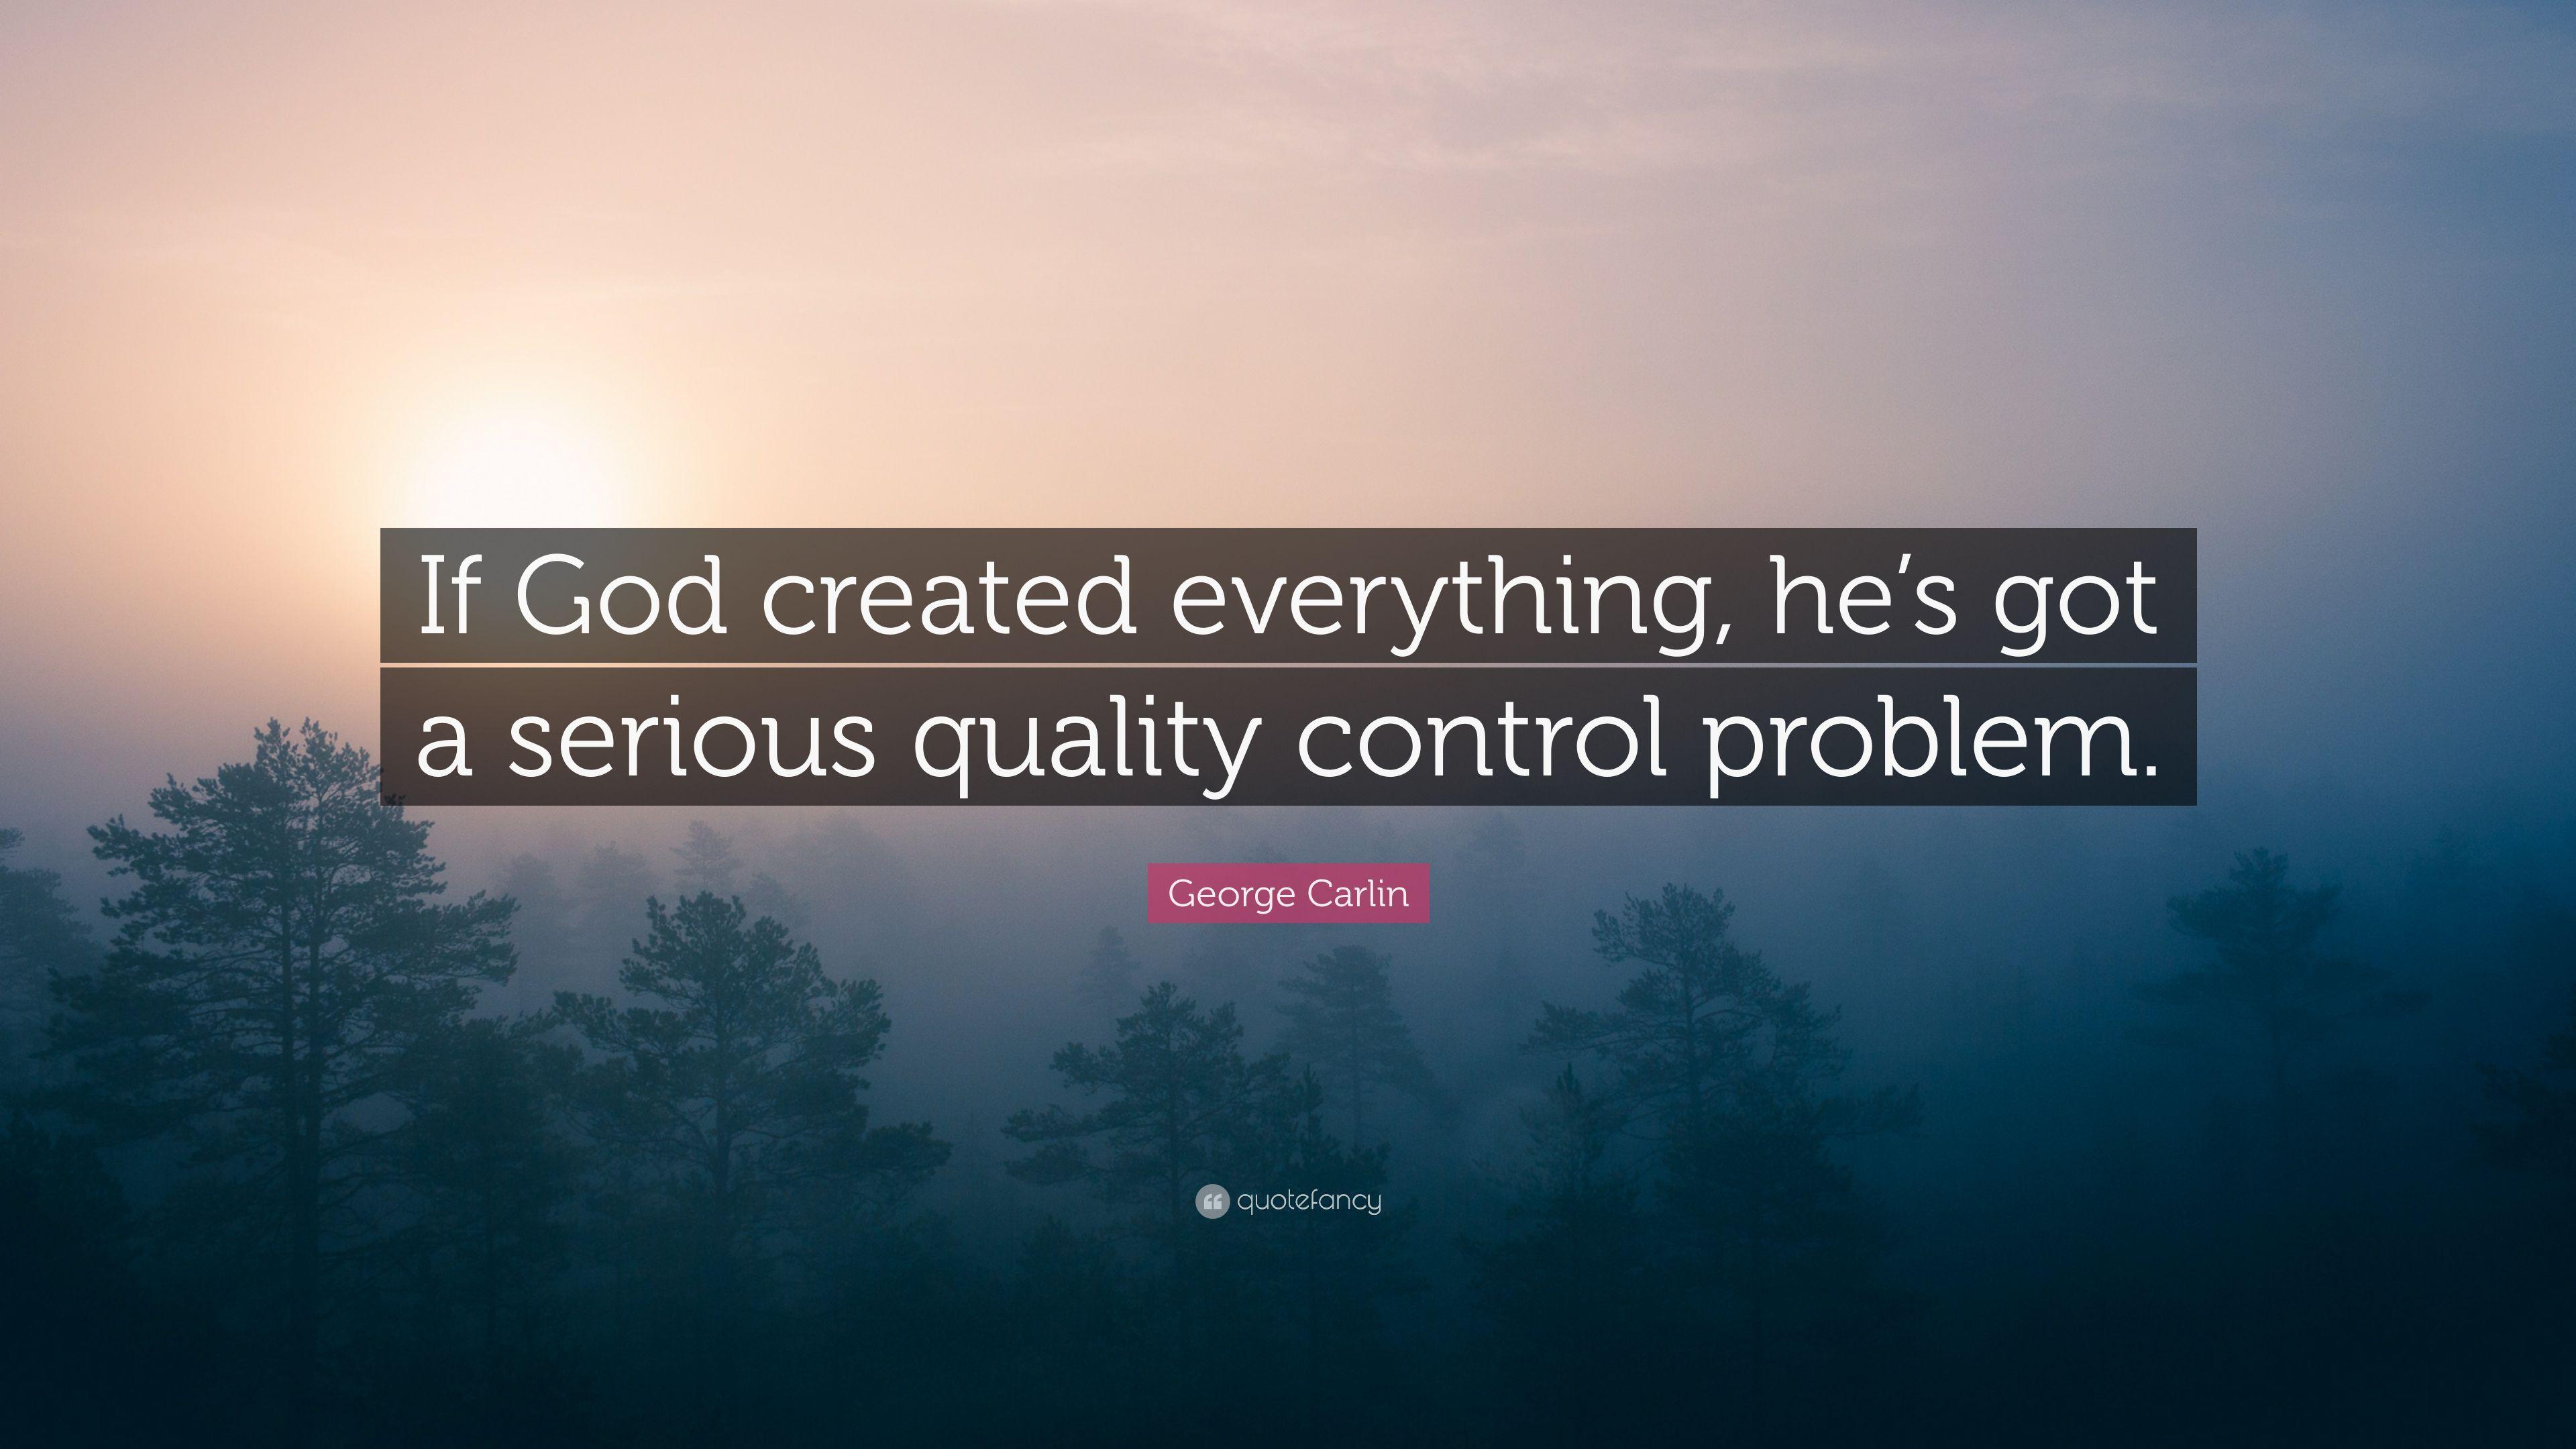 George Carlin Quote: “If God created everything, he's got a serious